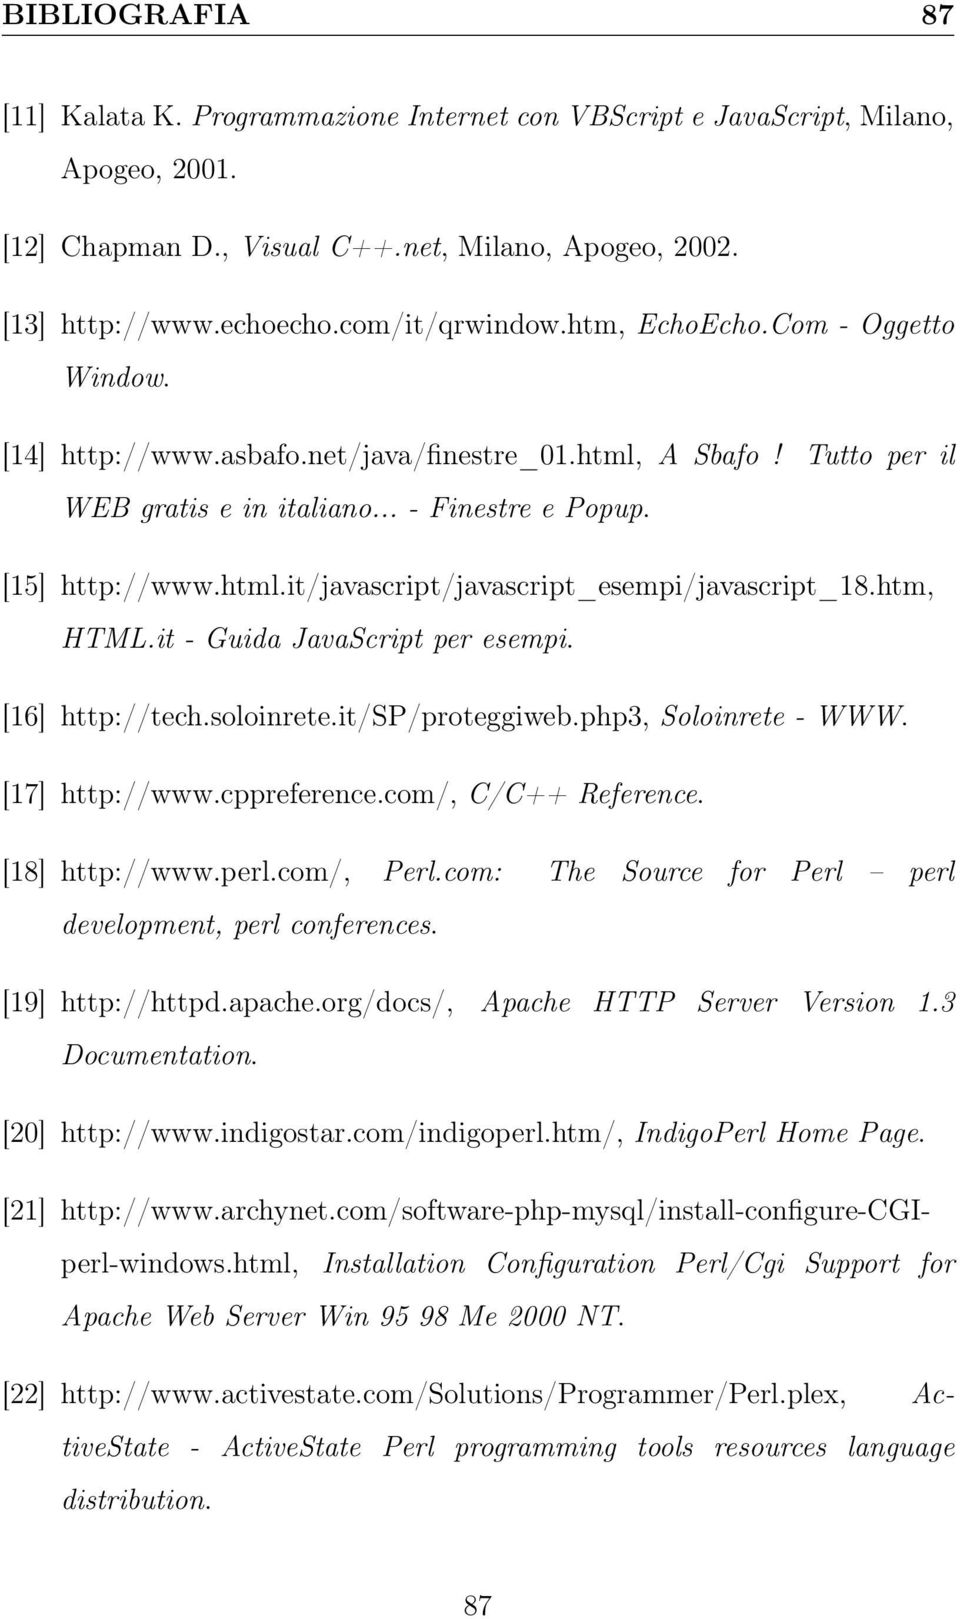 htm, HTML.it - Guida JavaScript per esempi. [16] http://tech.soloinrete.it/sp/proteggiweb.php3, Soloinrete - WWW. [17] http://www.cppreference.com/, C/C++ Reference. [18] http://www.perl.com/, Perl.